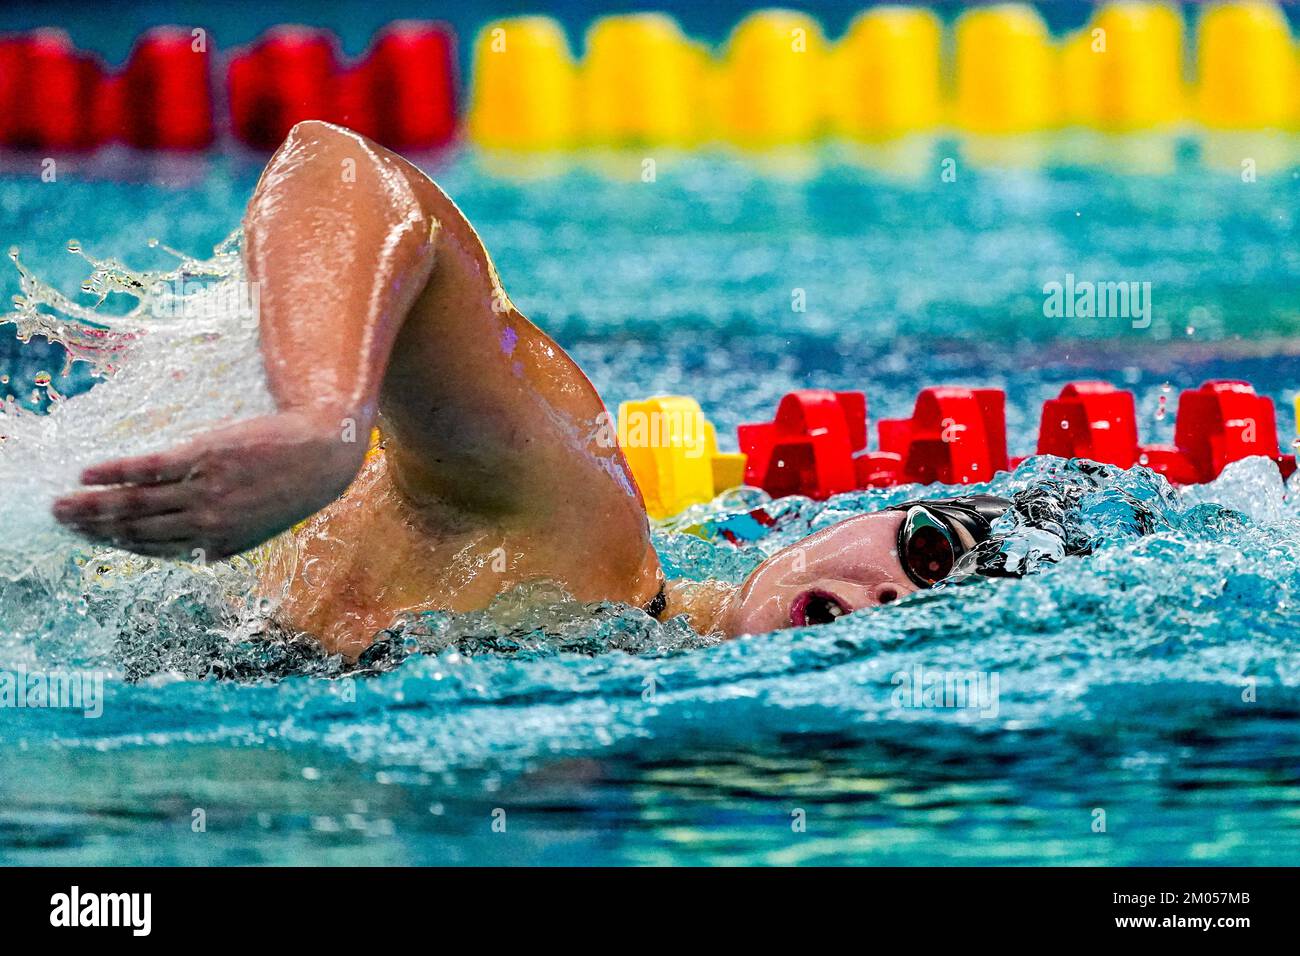 ROTTERDAM, NETHERLANDS - DECEMBER 4: Liesette Bruinsma competing in the Women, 400m Freestyle, Finals during the RQM Rotterdam Qualification Meet - Day 4 at Zwemcentrum Rotterdam on December 4, 2022 in Rotterdam, Netherlands (Photo by Jeroen Meuwsen/Orange Pictures) Stock Photo